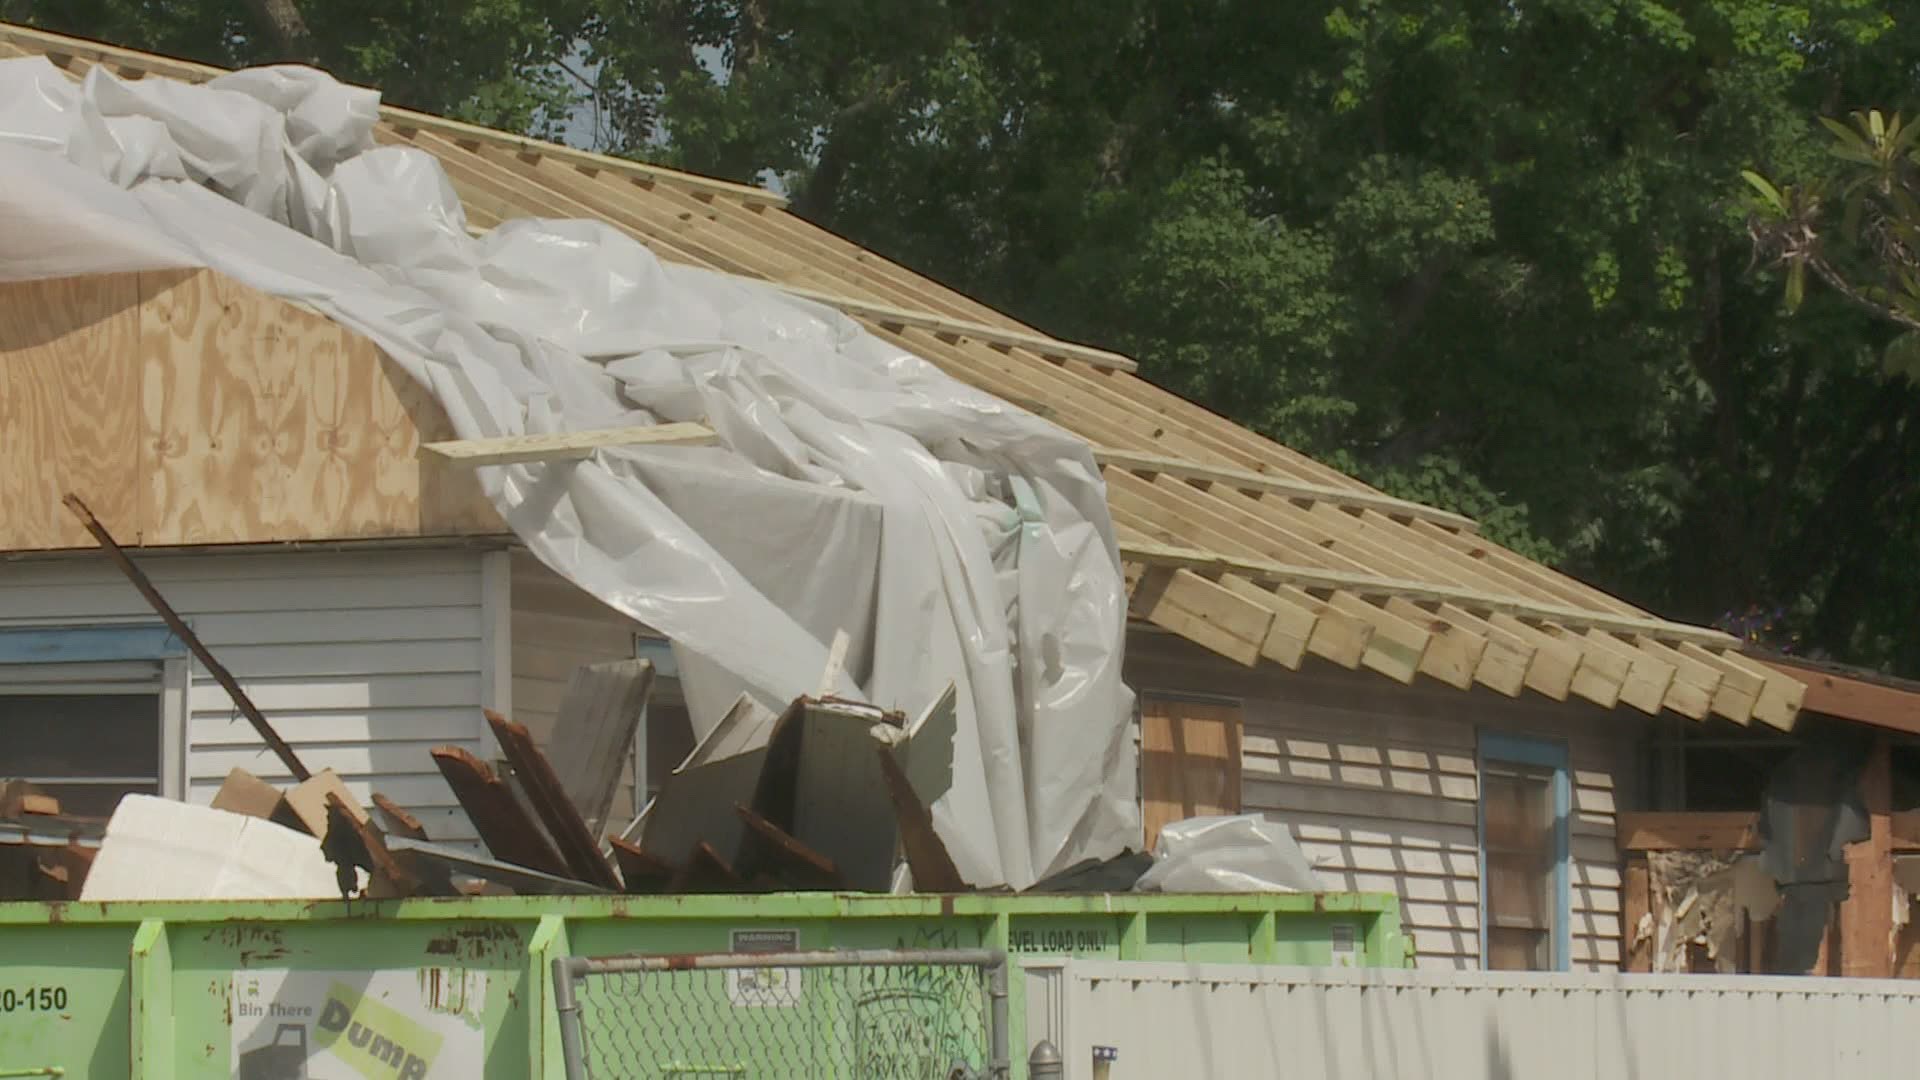 A Bridge City resident is grateful for the help she received from kind-hearted volunteers that fixed her roof in the midst of a family crisis.